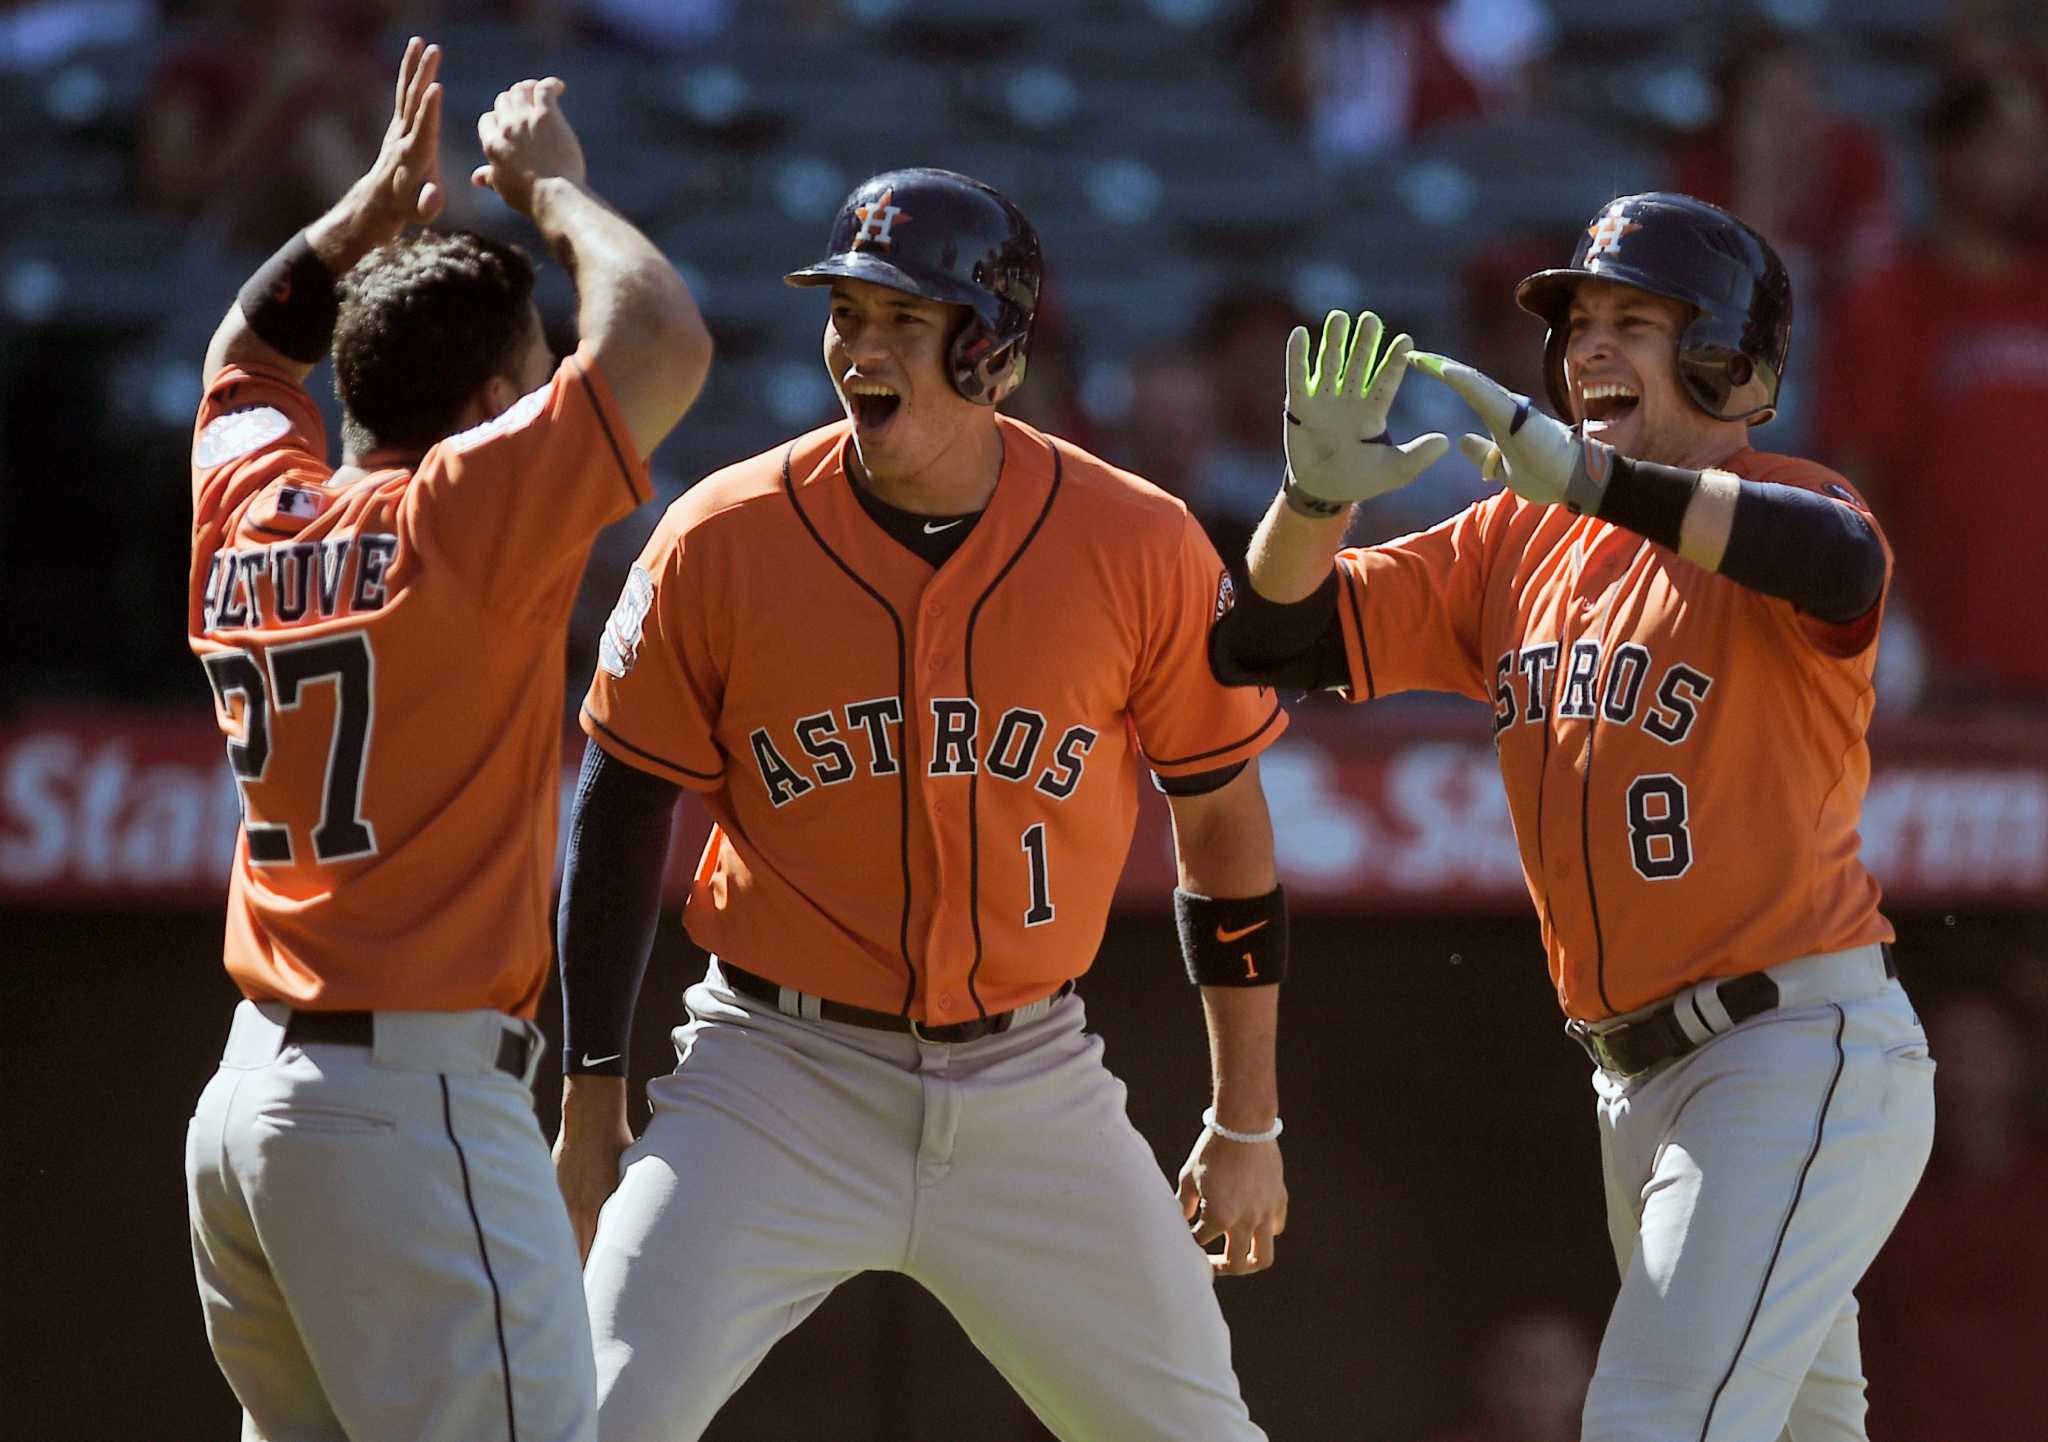 Astros score 5 in ninth to stun Angels